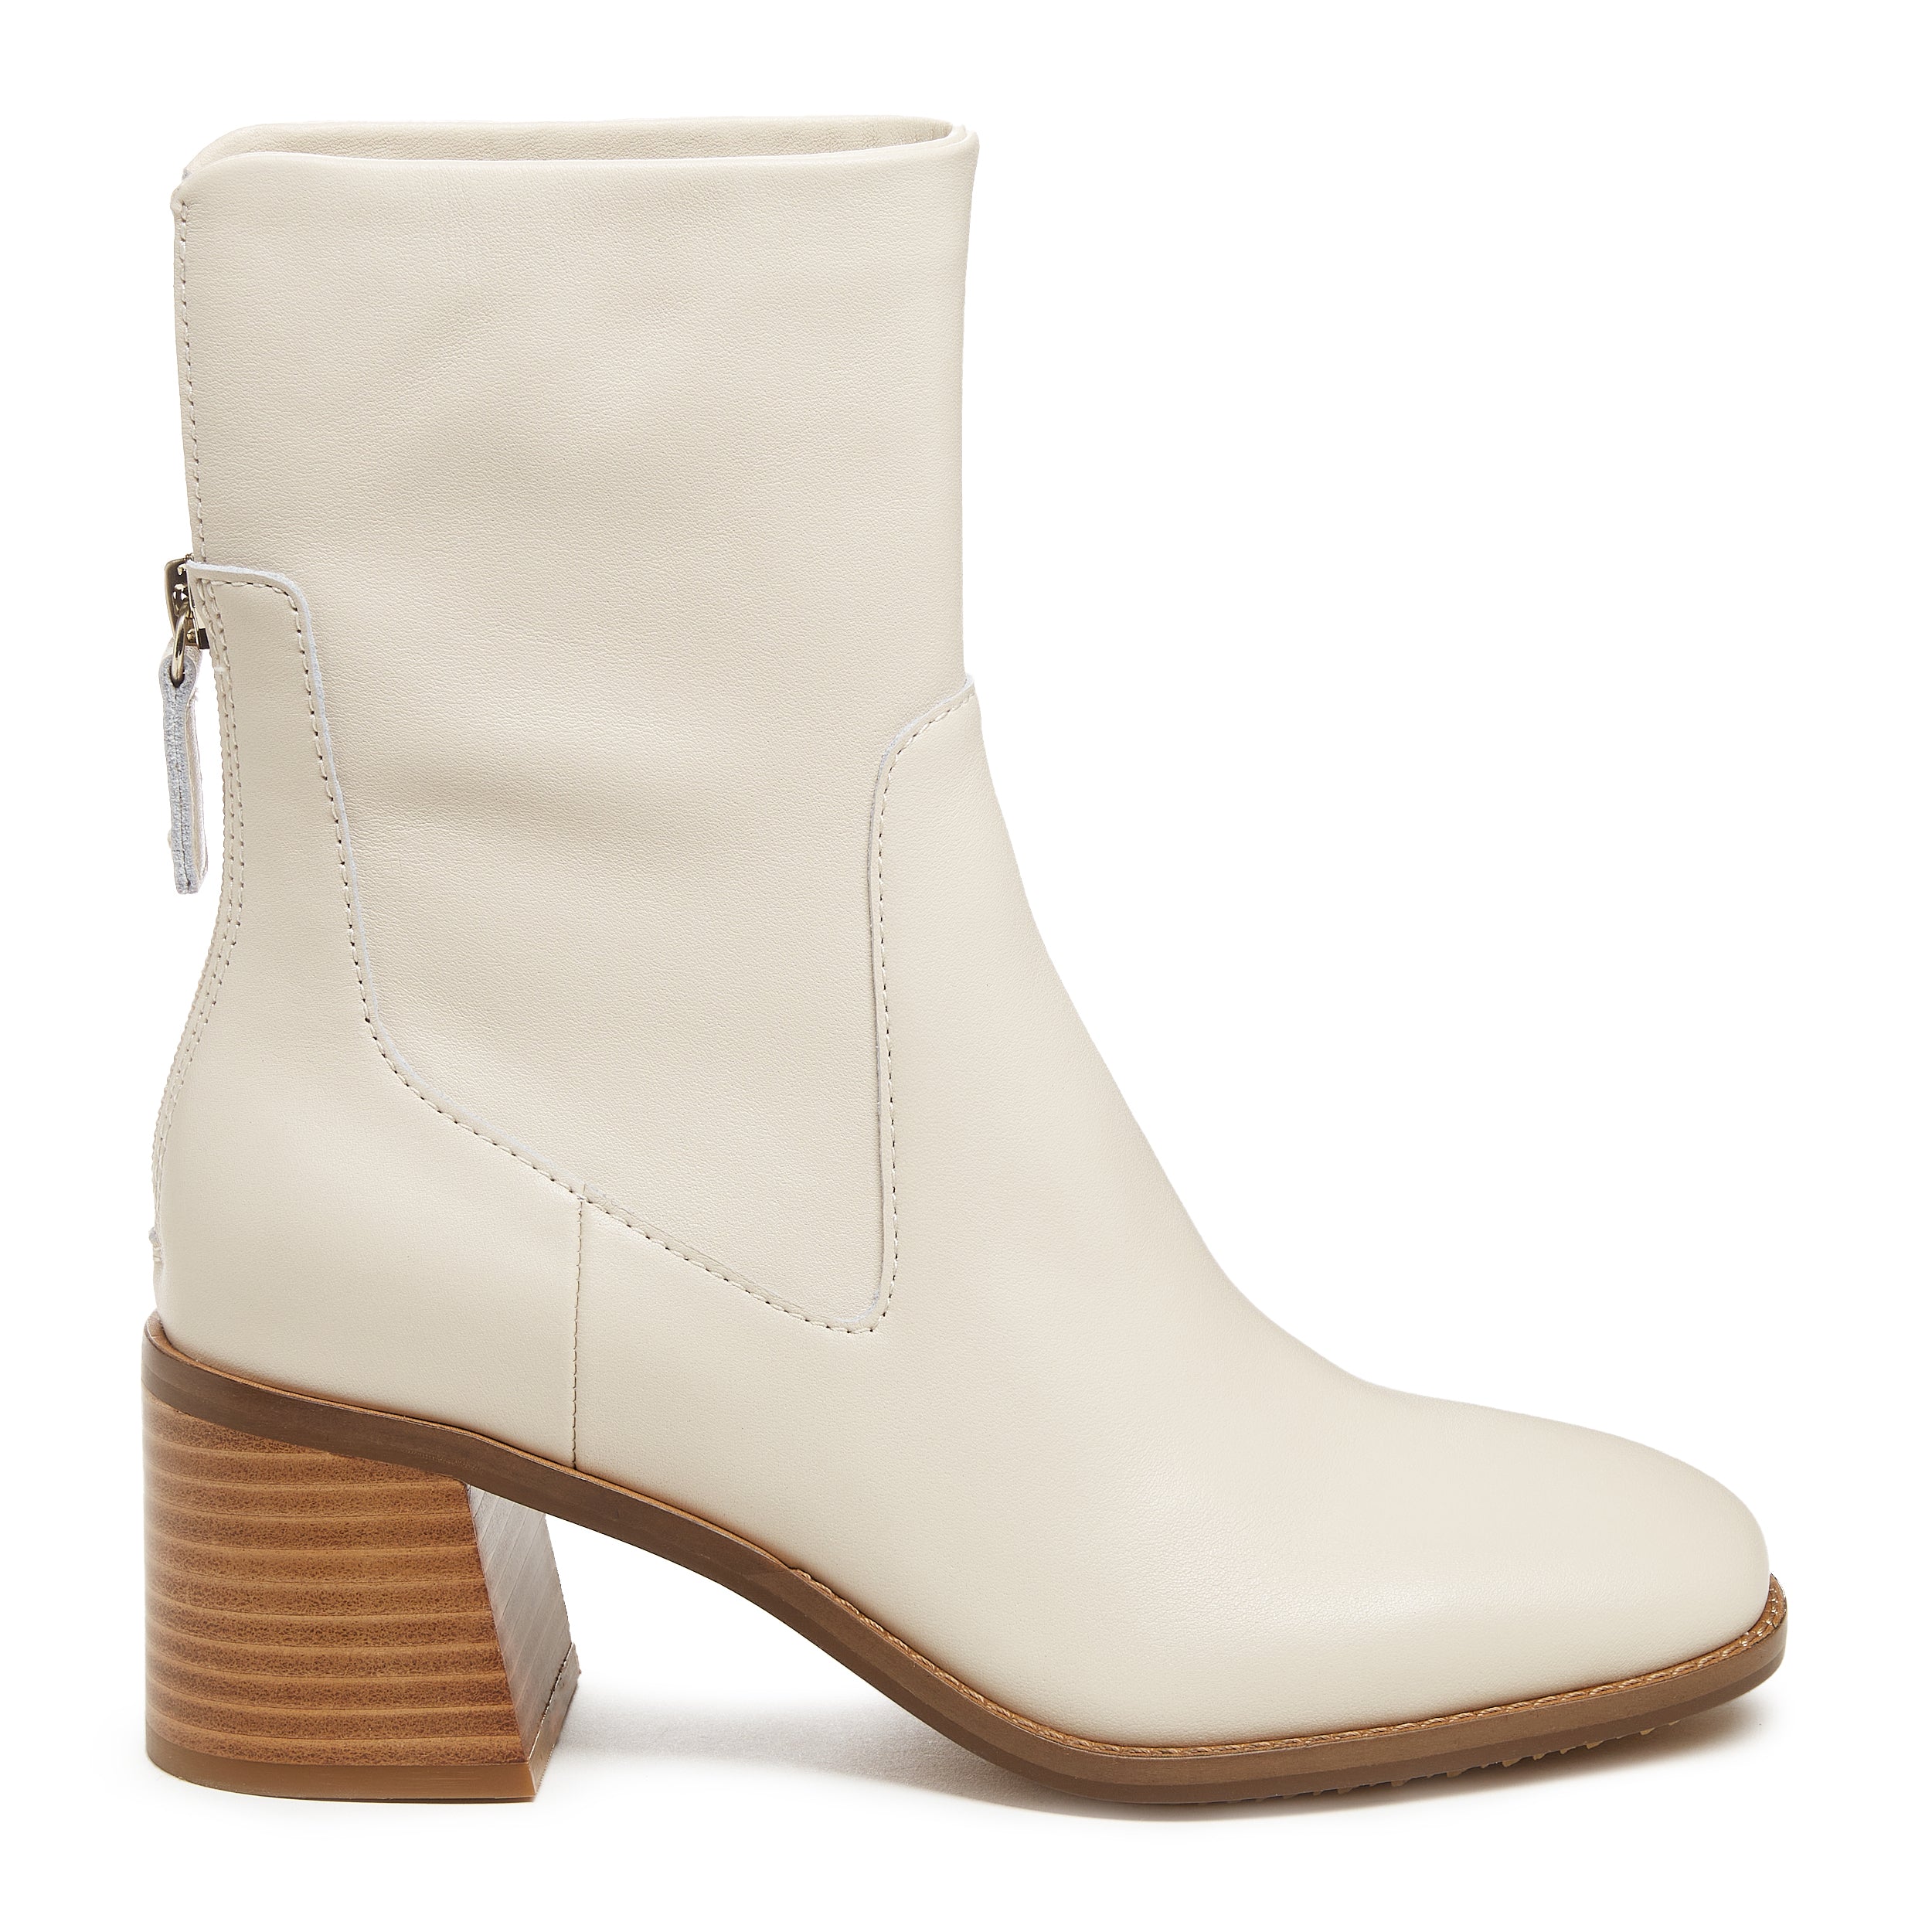 STACCATO - Official Site] Beige Square Toe Block Heel Ankle Boots